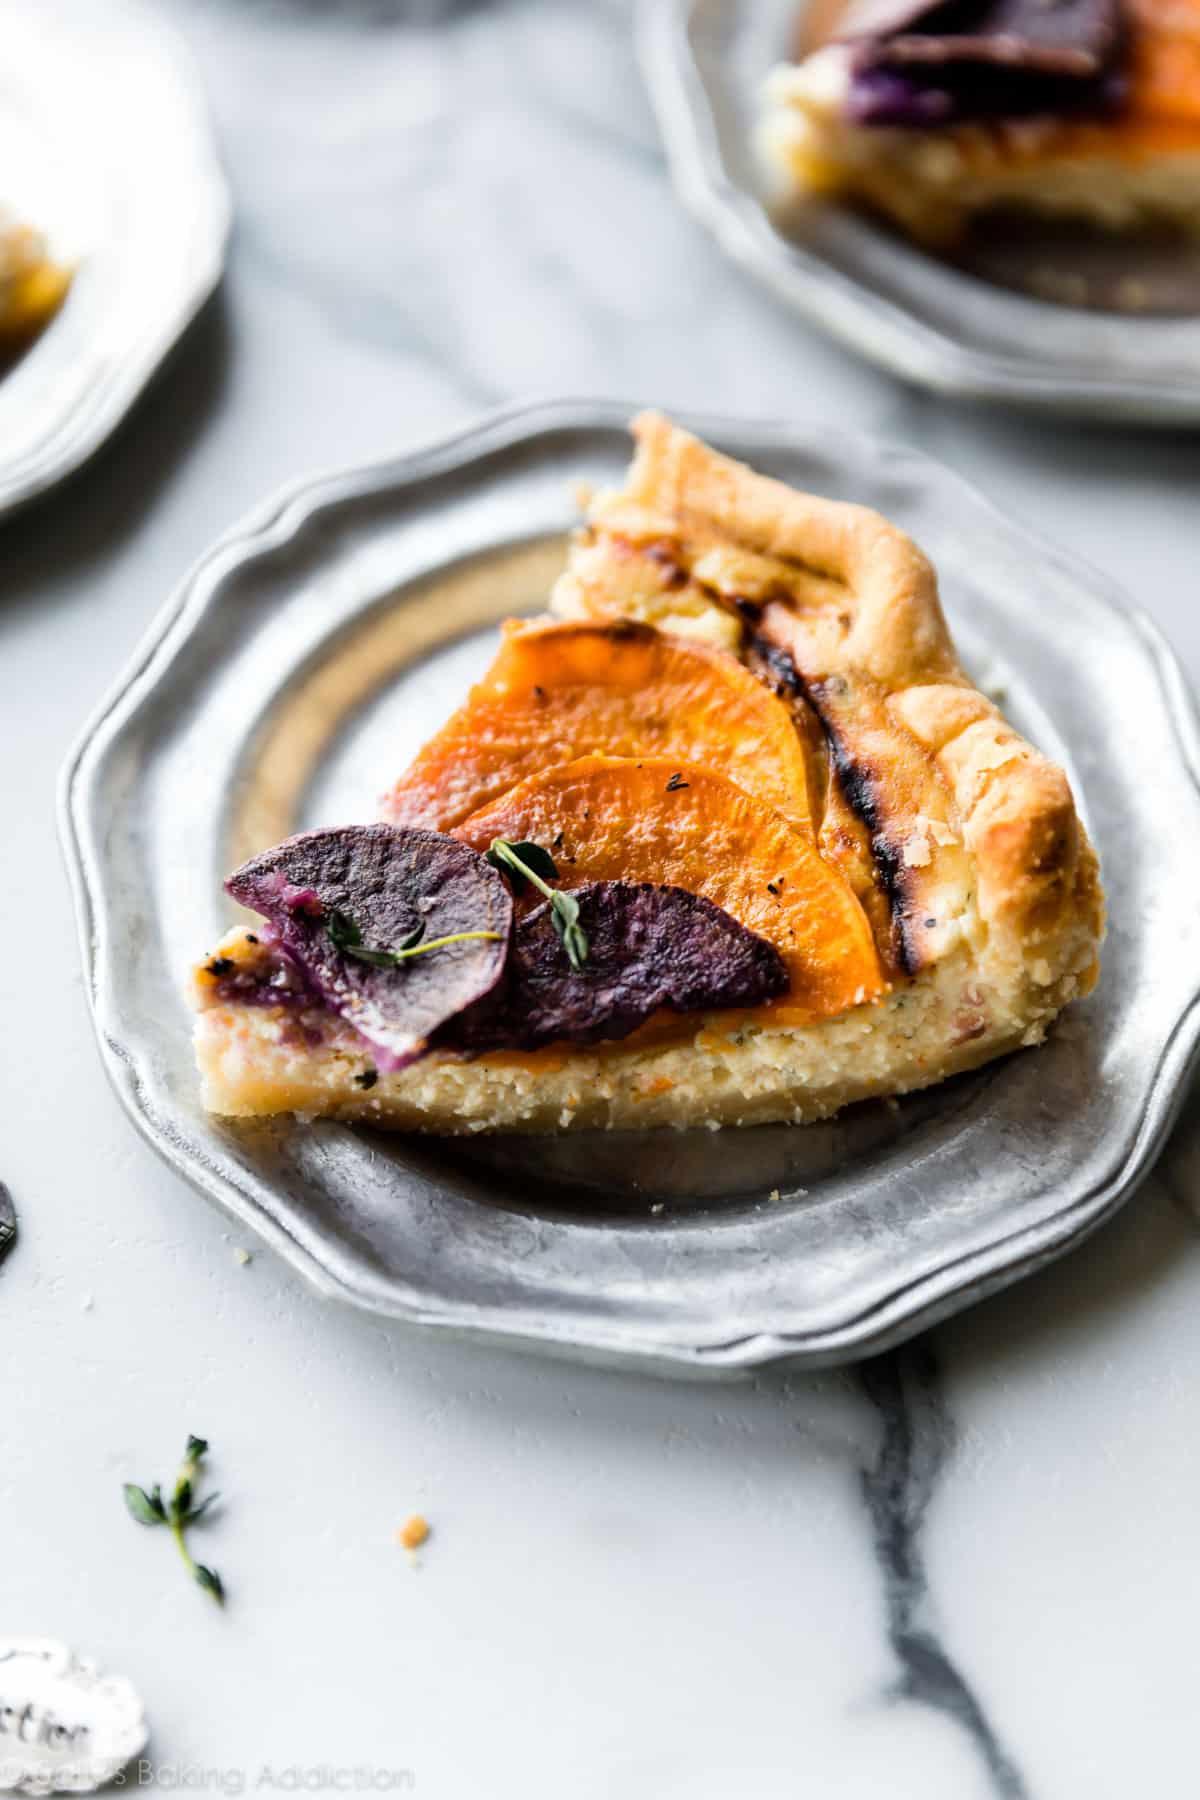 Slice of savory vegetable tart on a silver plate